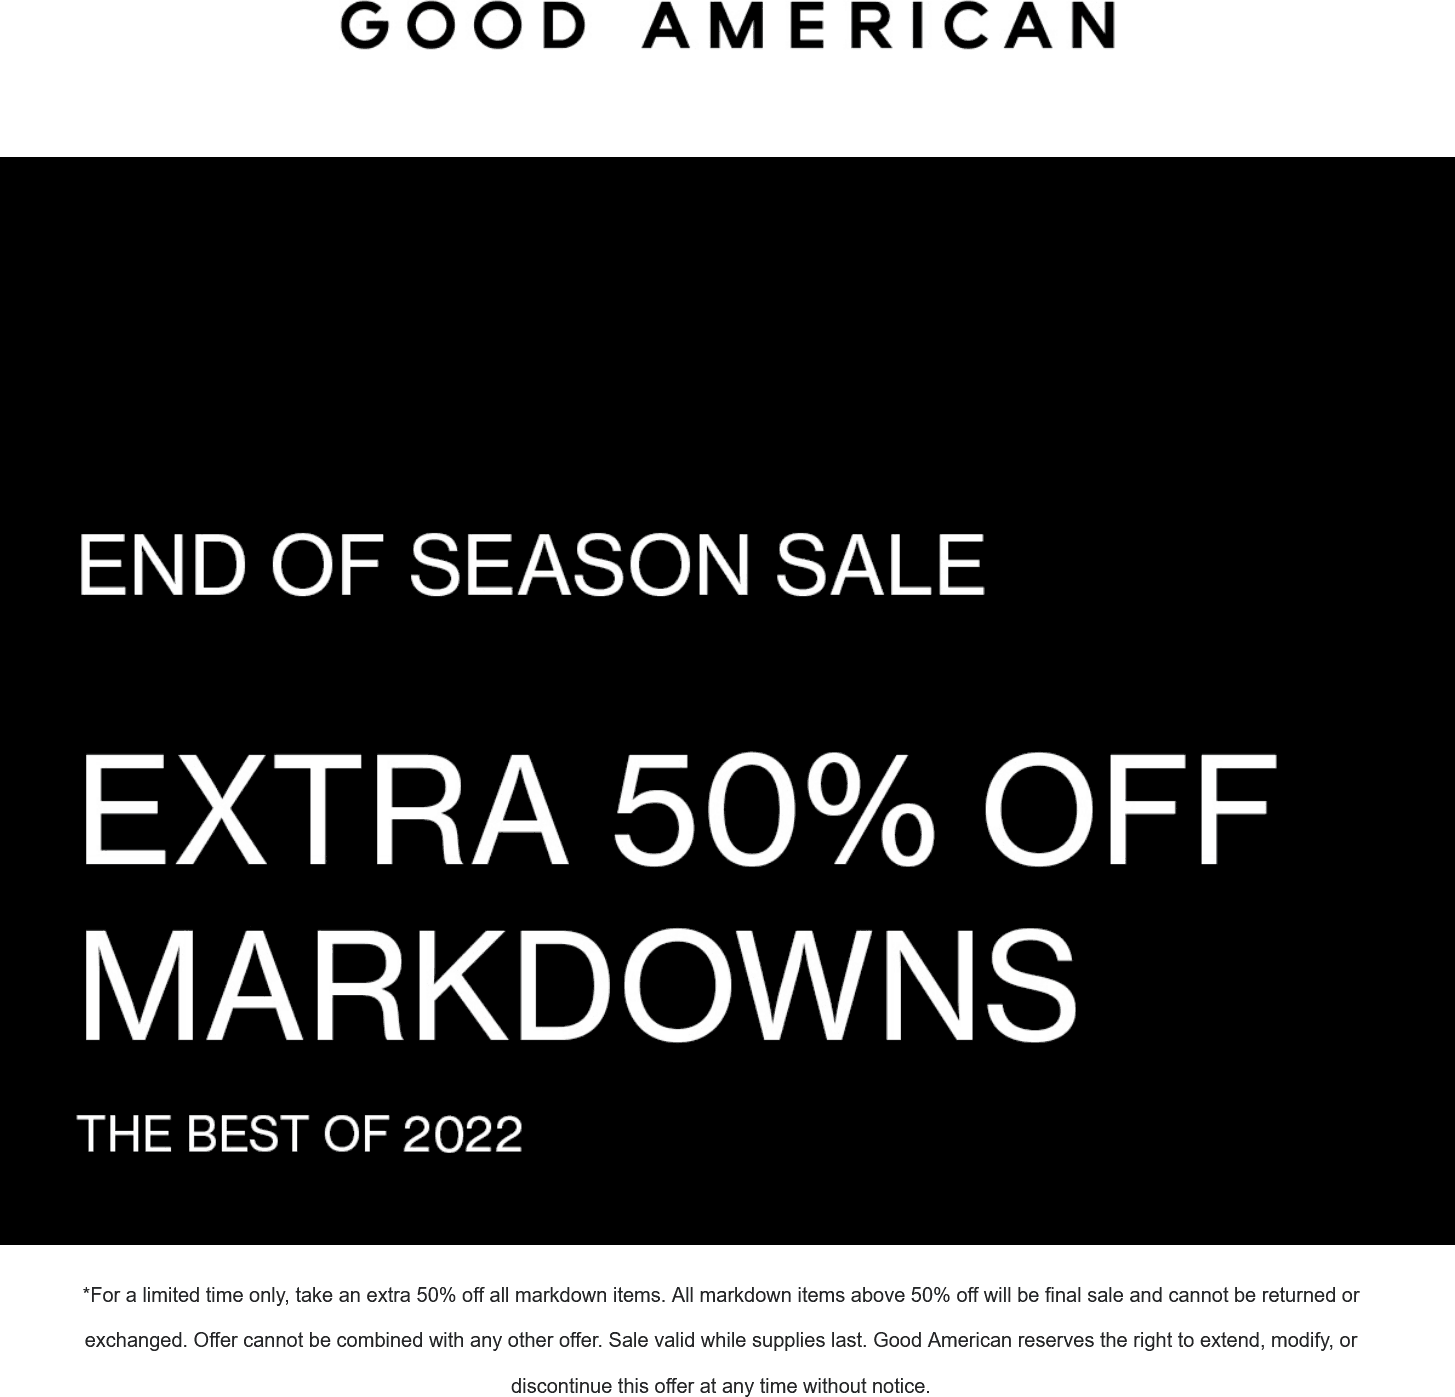 Good American stores Coupon  Extra 50% off all sale items at Good American #goodamerican 